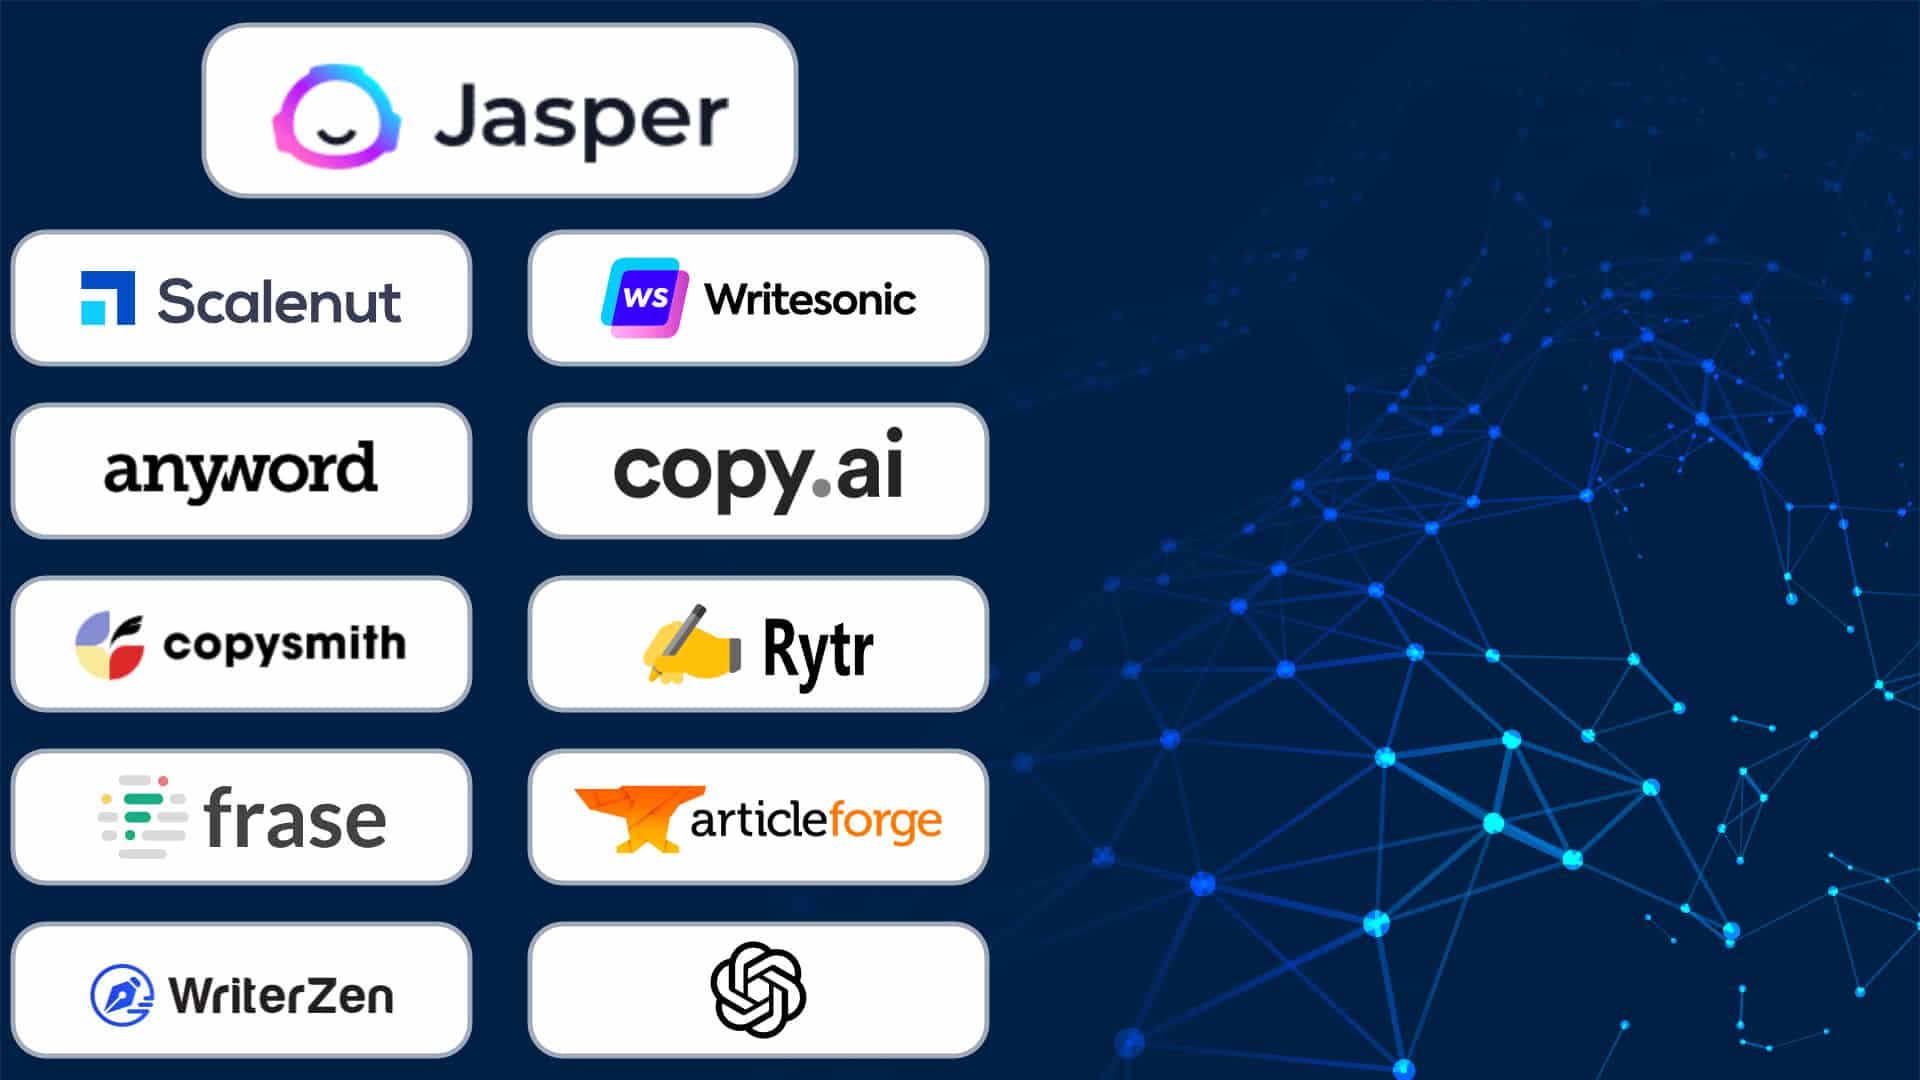 What Sets Jasper AI Apart From Its Competitors? Highlighting The Unique Selling Points Of Jasper AI. Jasper AI Advantages Competitive Edge, Strengths, Differentiators